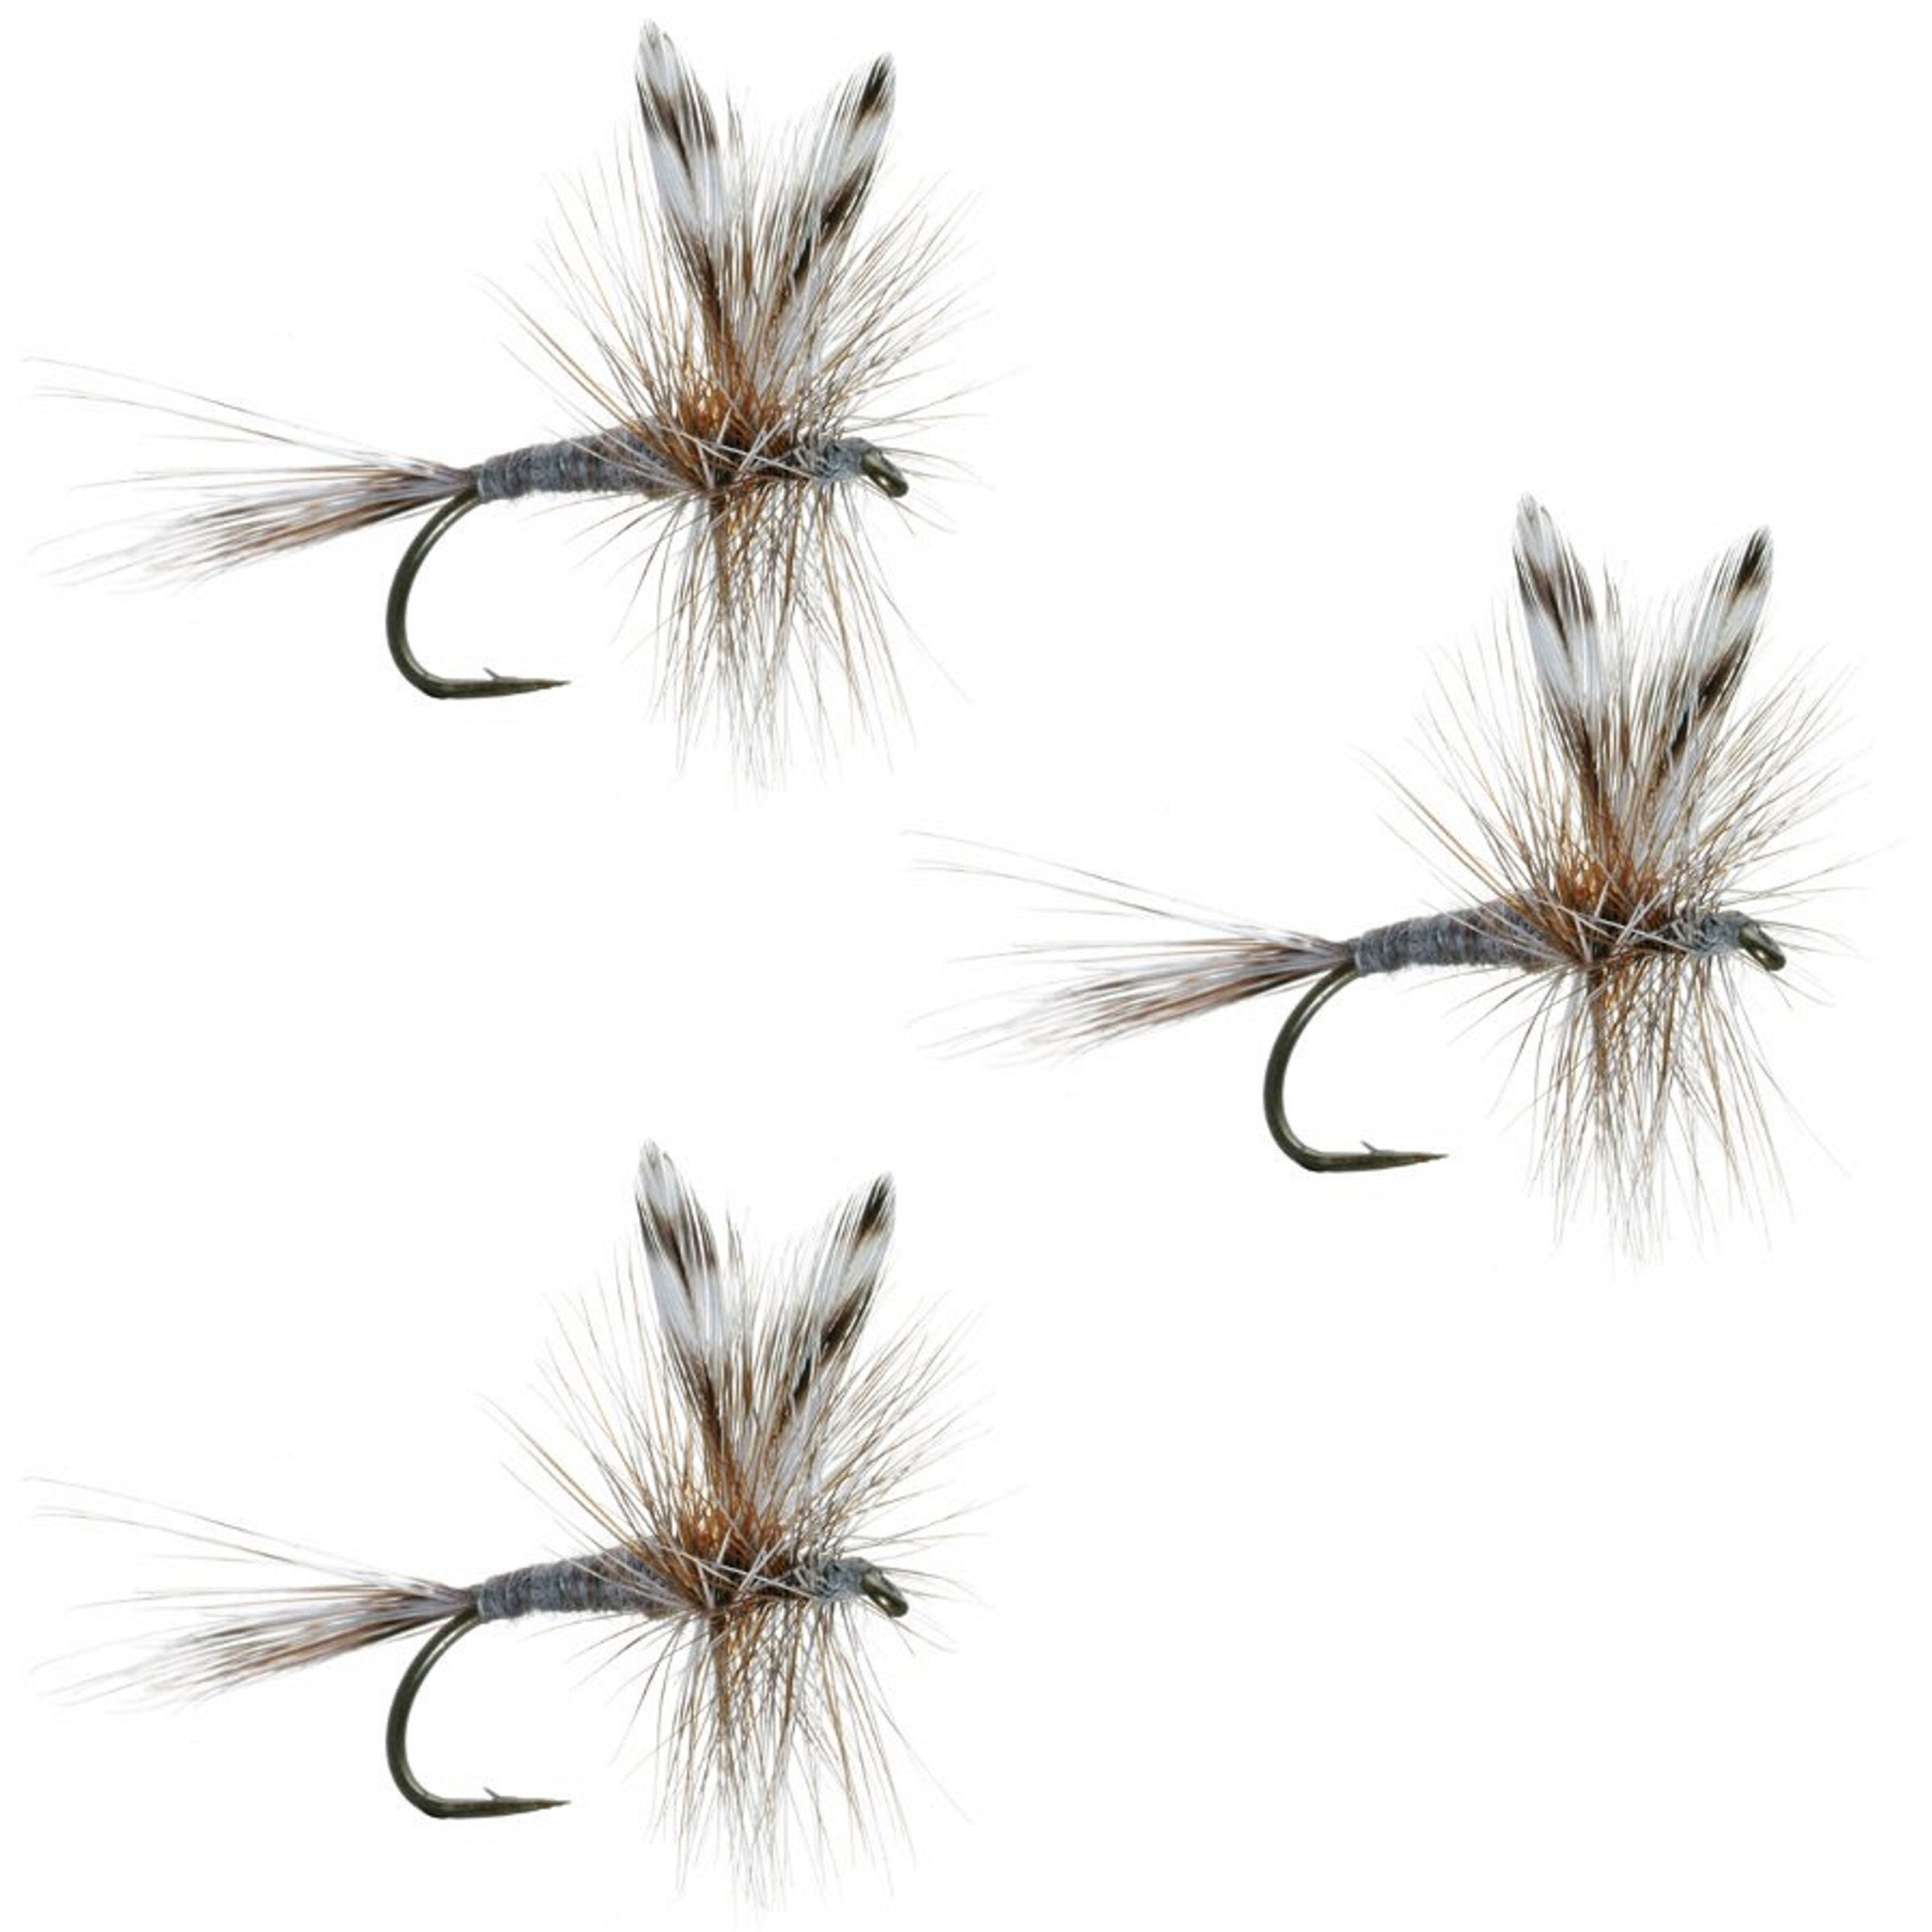 ADAMS SUPERFLY - DRY FLY - TROUT FISHING FLIES - 12 FLIES X SIZE #16